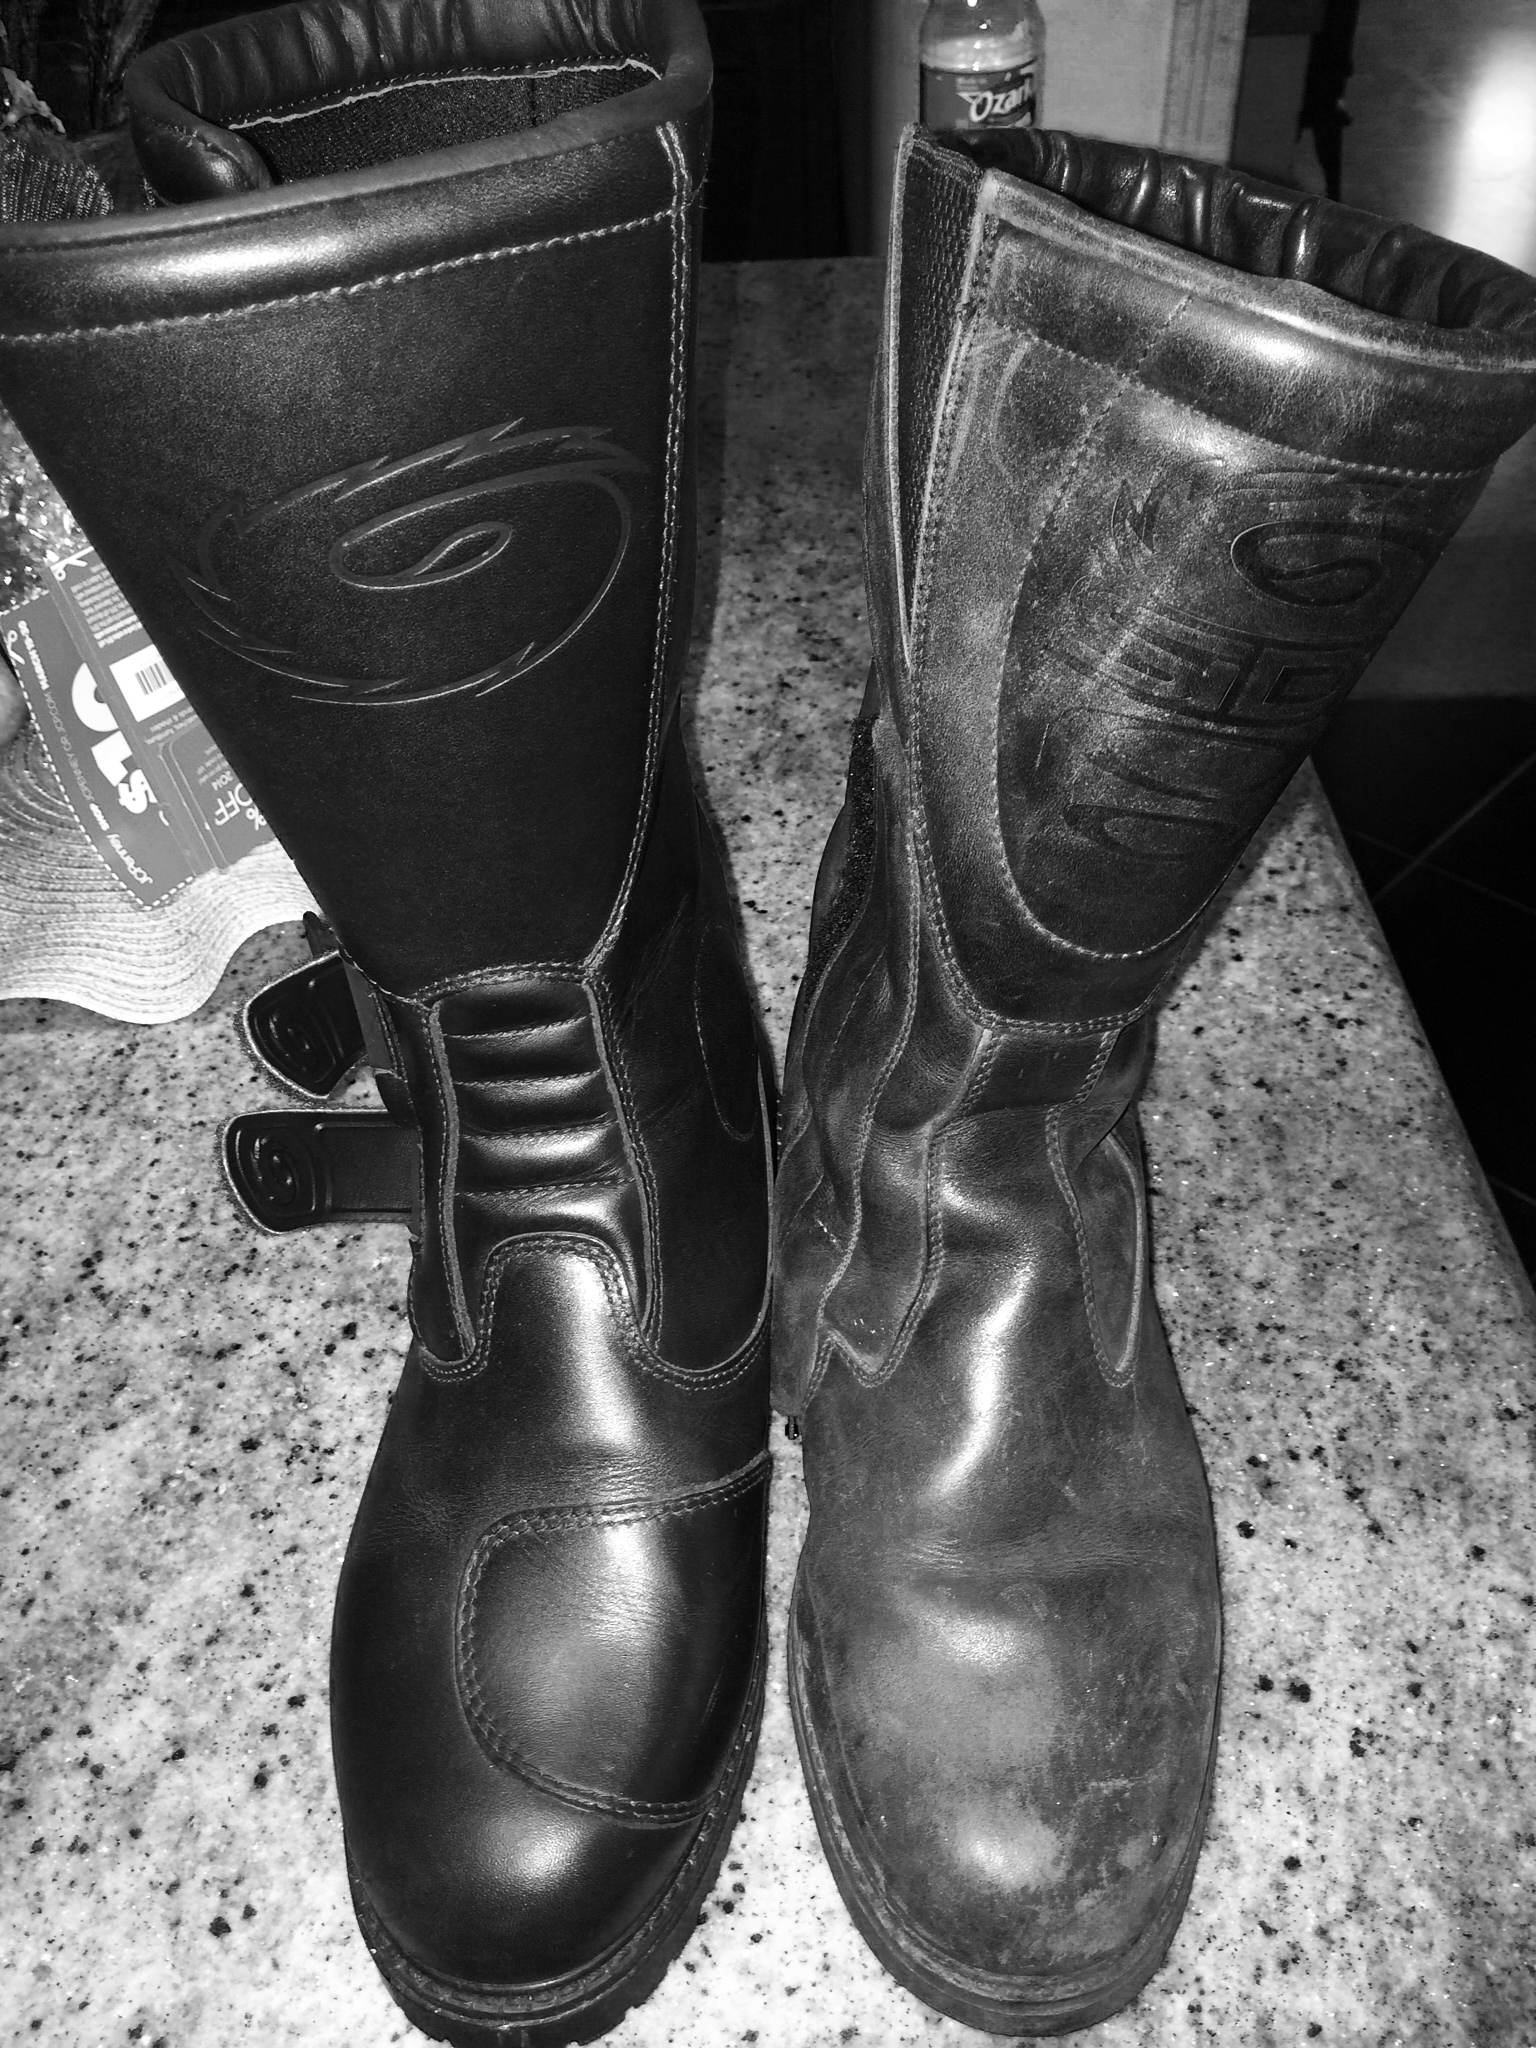 New "On Road" leather boot on left and my 10 year old Lorica boot on the right!